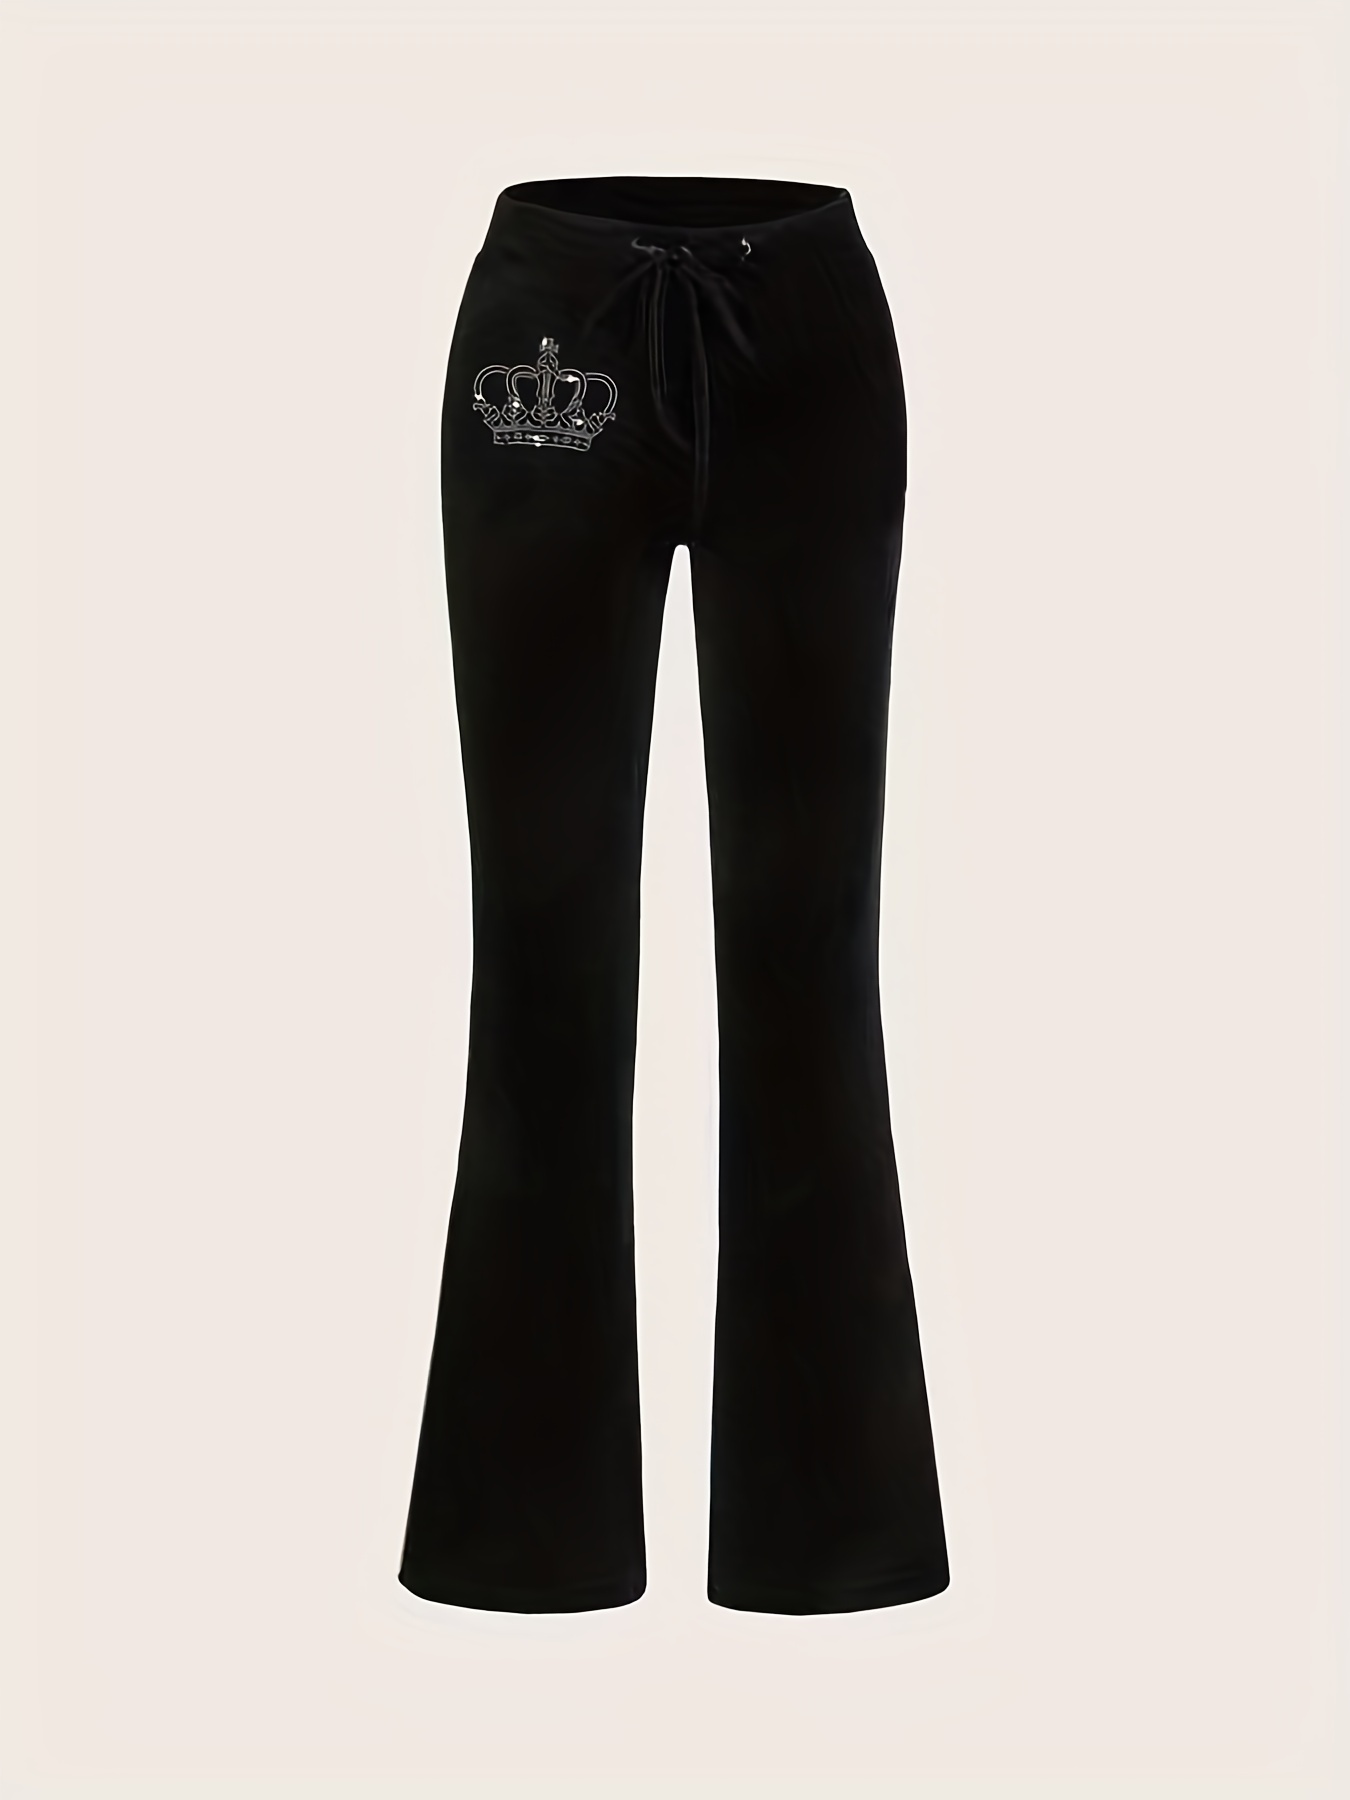 Juicy Couture Womens Black Velour Flared Trouser